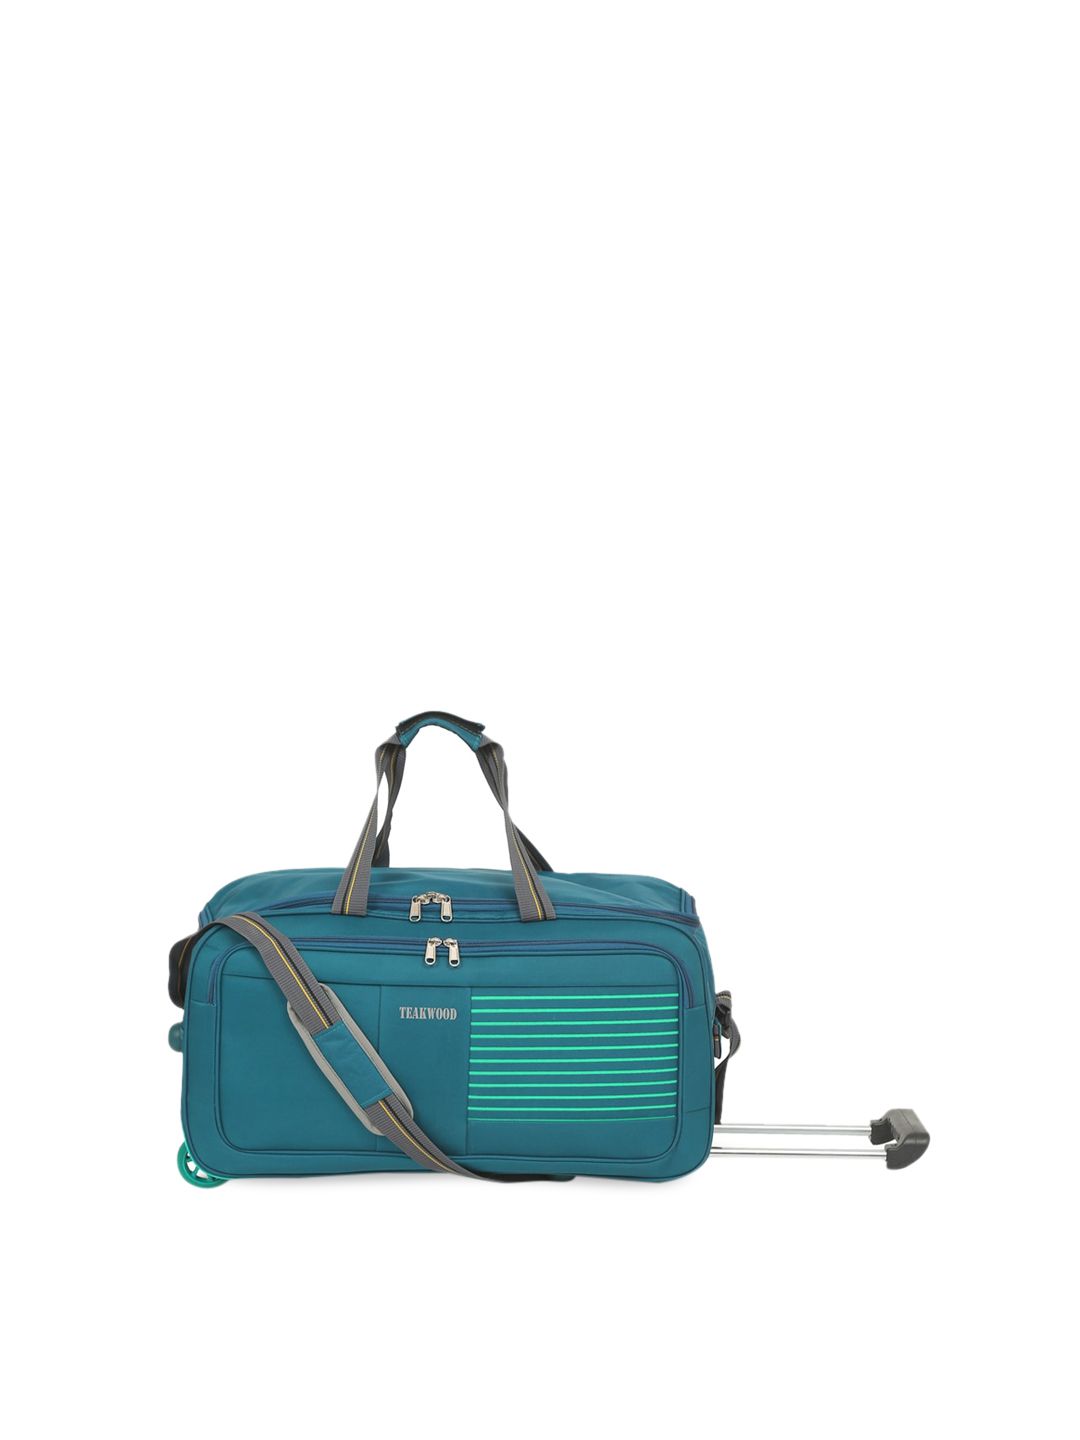 Teakwood Leathers Teal Solid Soft Sided Medium Trolley Bag Price in India